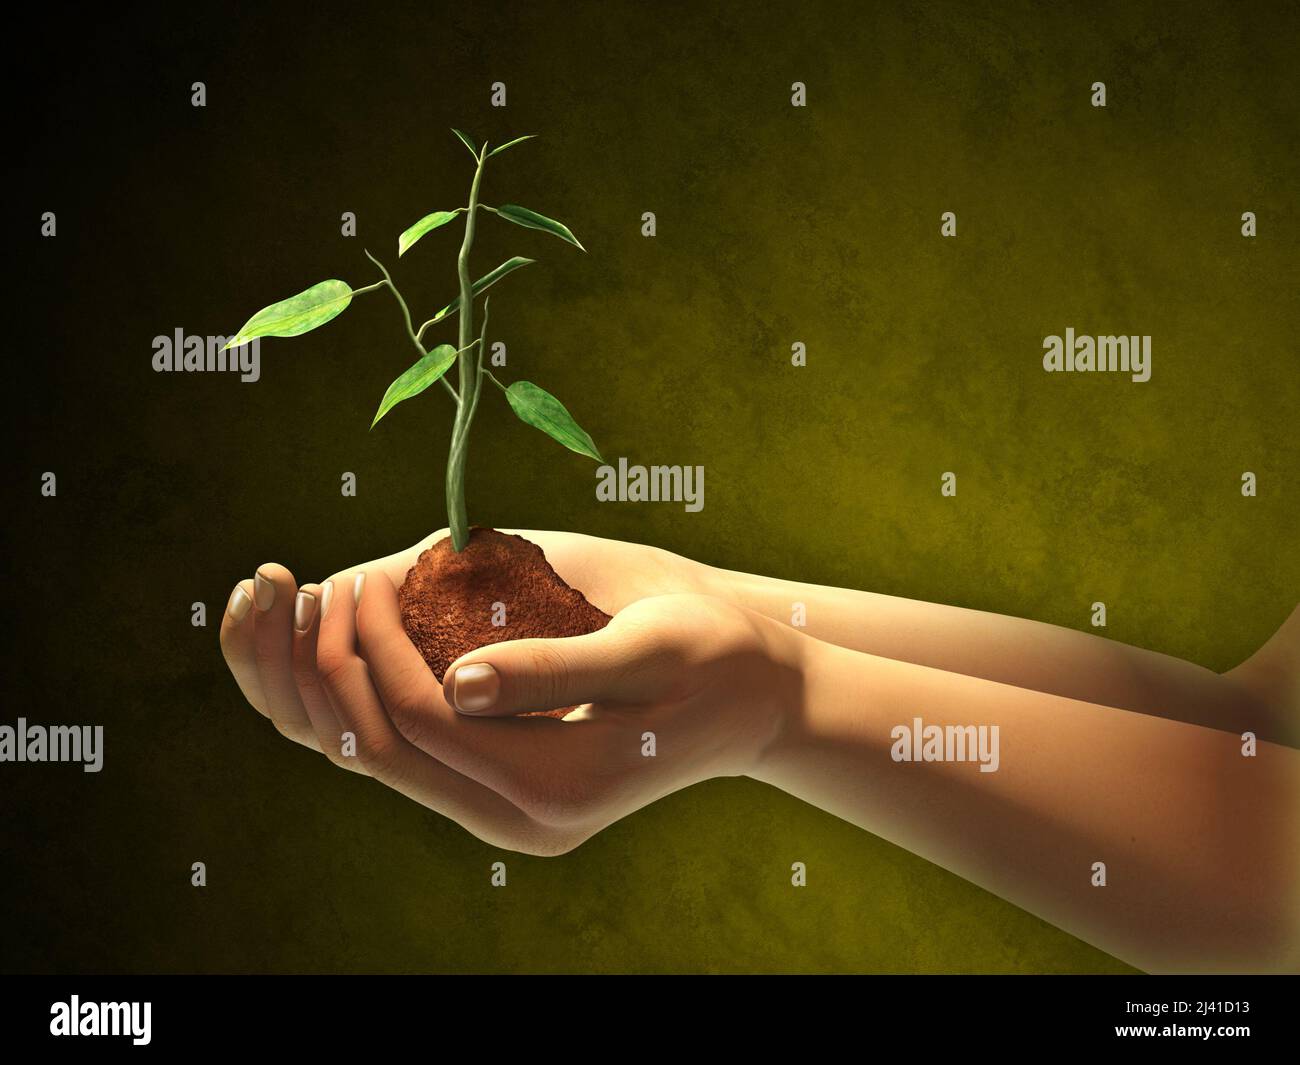 Female hands holding some soil and a seedling. Digital illustration. Clipping path included to separate hands and seedling from background Stock Photo